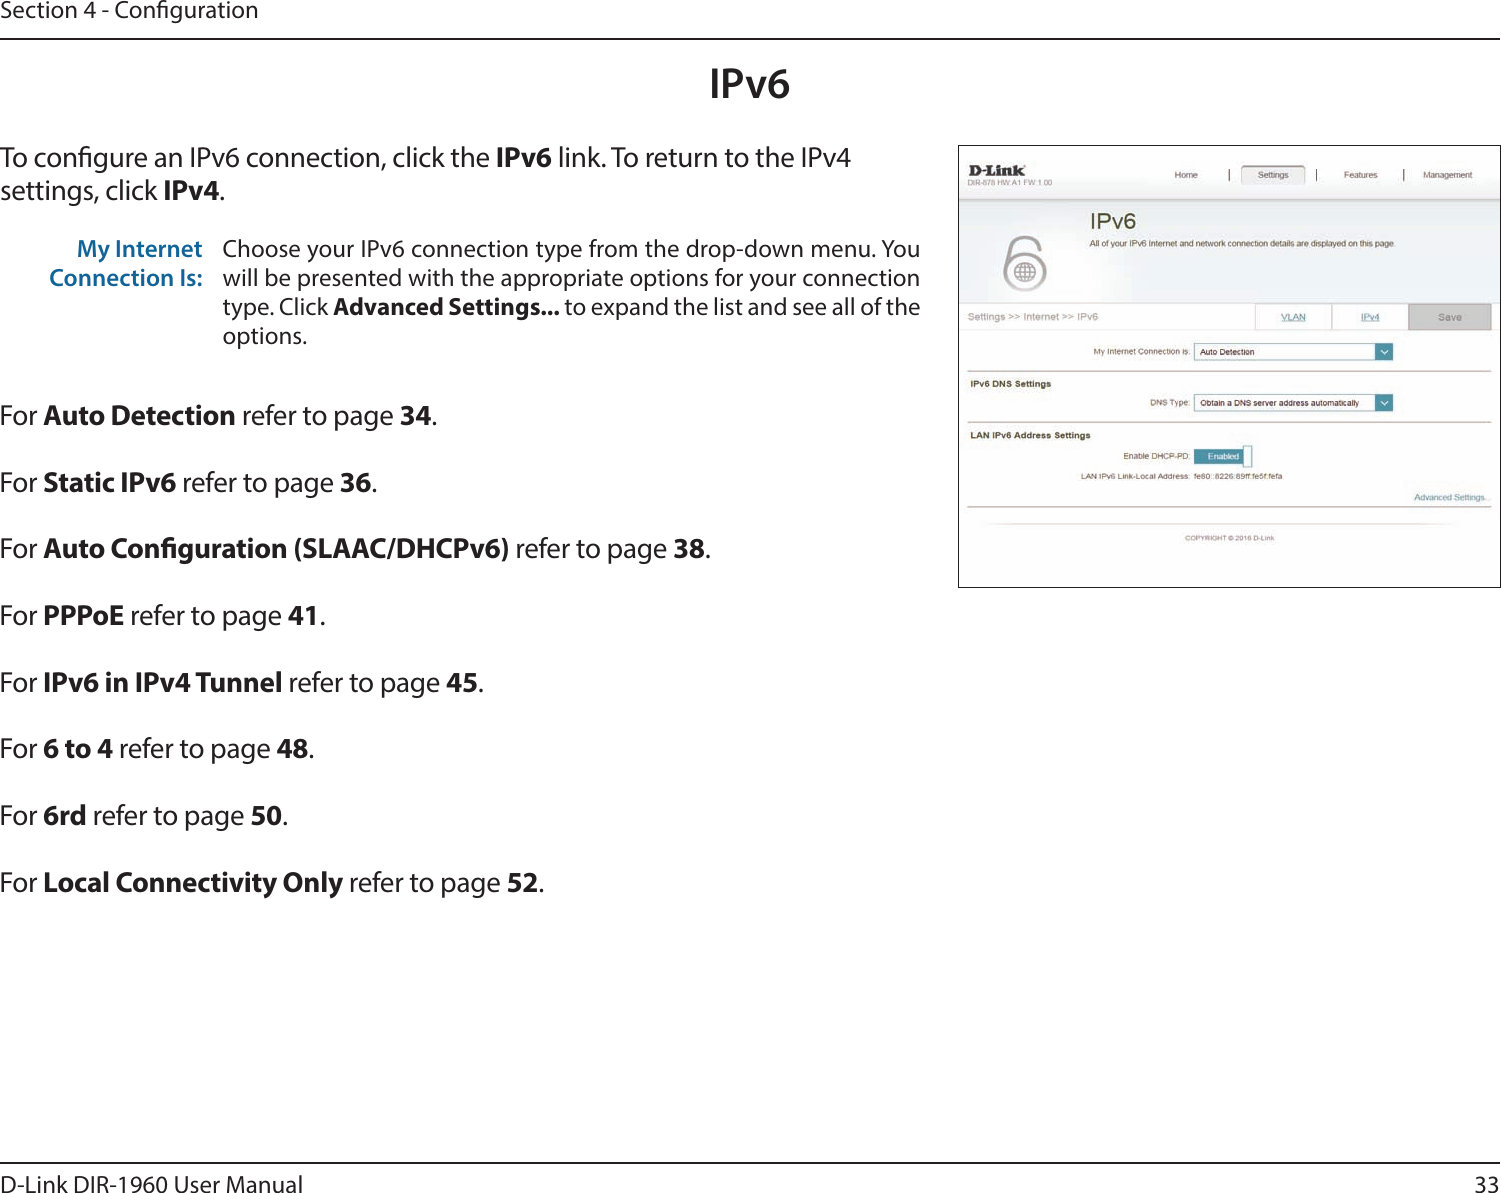 33D-Link DIR-1960 User ManualSection 4 - CongurationIPv6To congure an IPv6 connection, click the IPv6 link. To return to the IPv4 settings, click IPv4.For Auto Detection refer to page 34.For Static IPv6 refer to page 36.For Auto Conguration (SLAAC/DHCPv6) refer to page 38.For PPPoE refer to page 41.For IPv6 in IPv4 Tunnel refer to page 45.For 6 to 4 refer to page 48.For 6rd refer to page 50.For Local Connectivity Only refer to page 52.My Internet Connection Is:Choose your IPv6 connection type from the drop-down menu. You will be presented with the appropriate options for your connection type. Click Advanced Settings... to expand the list and see all of the options.